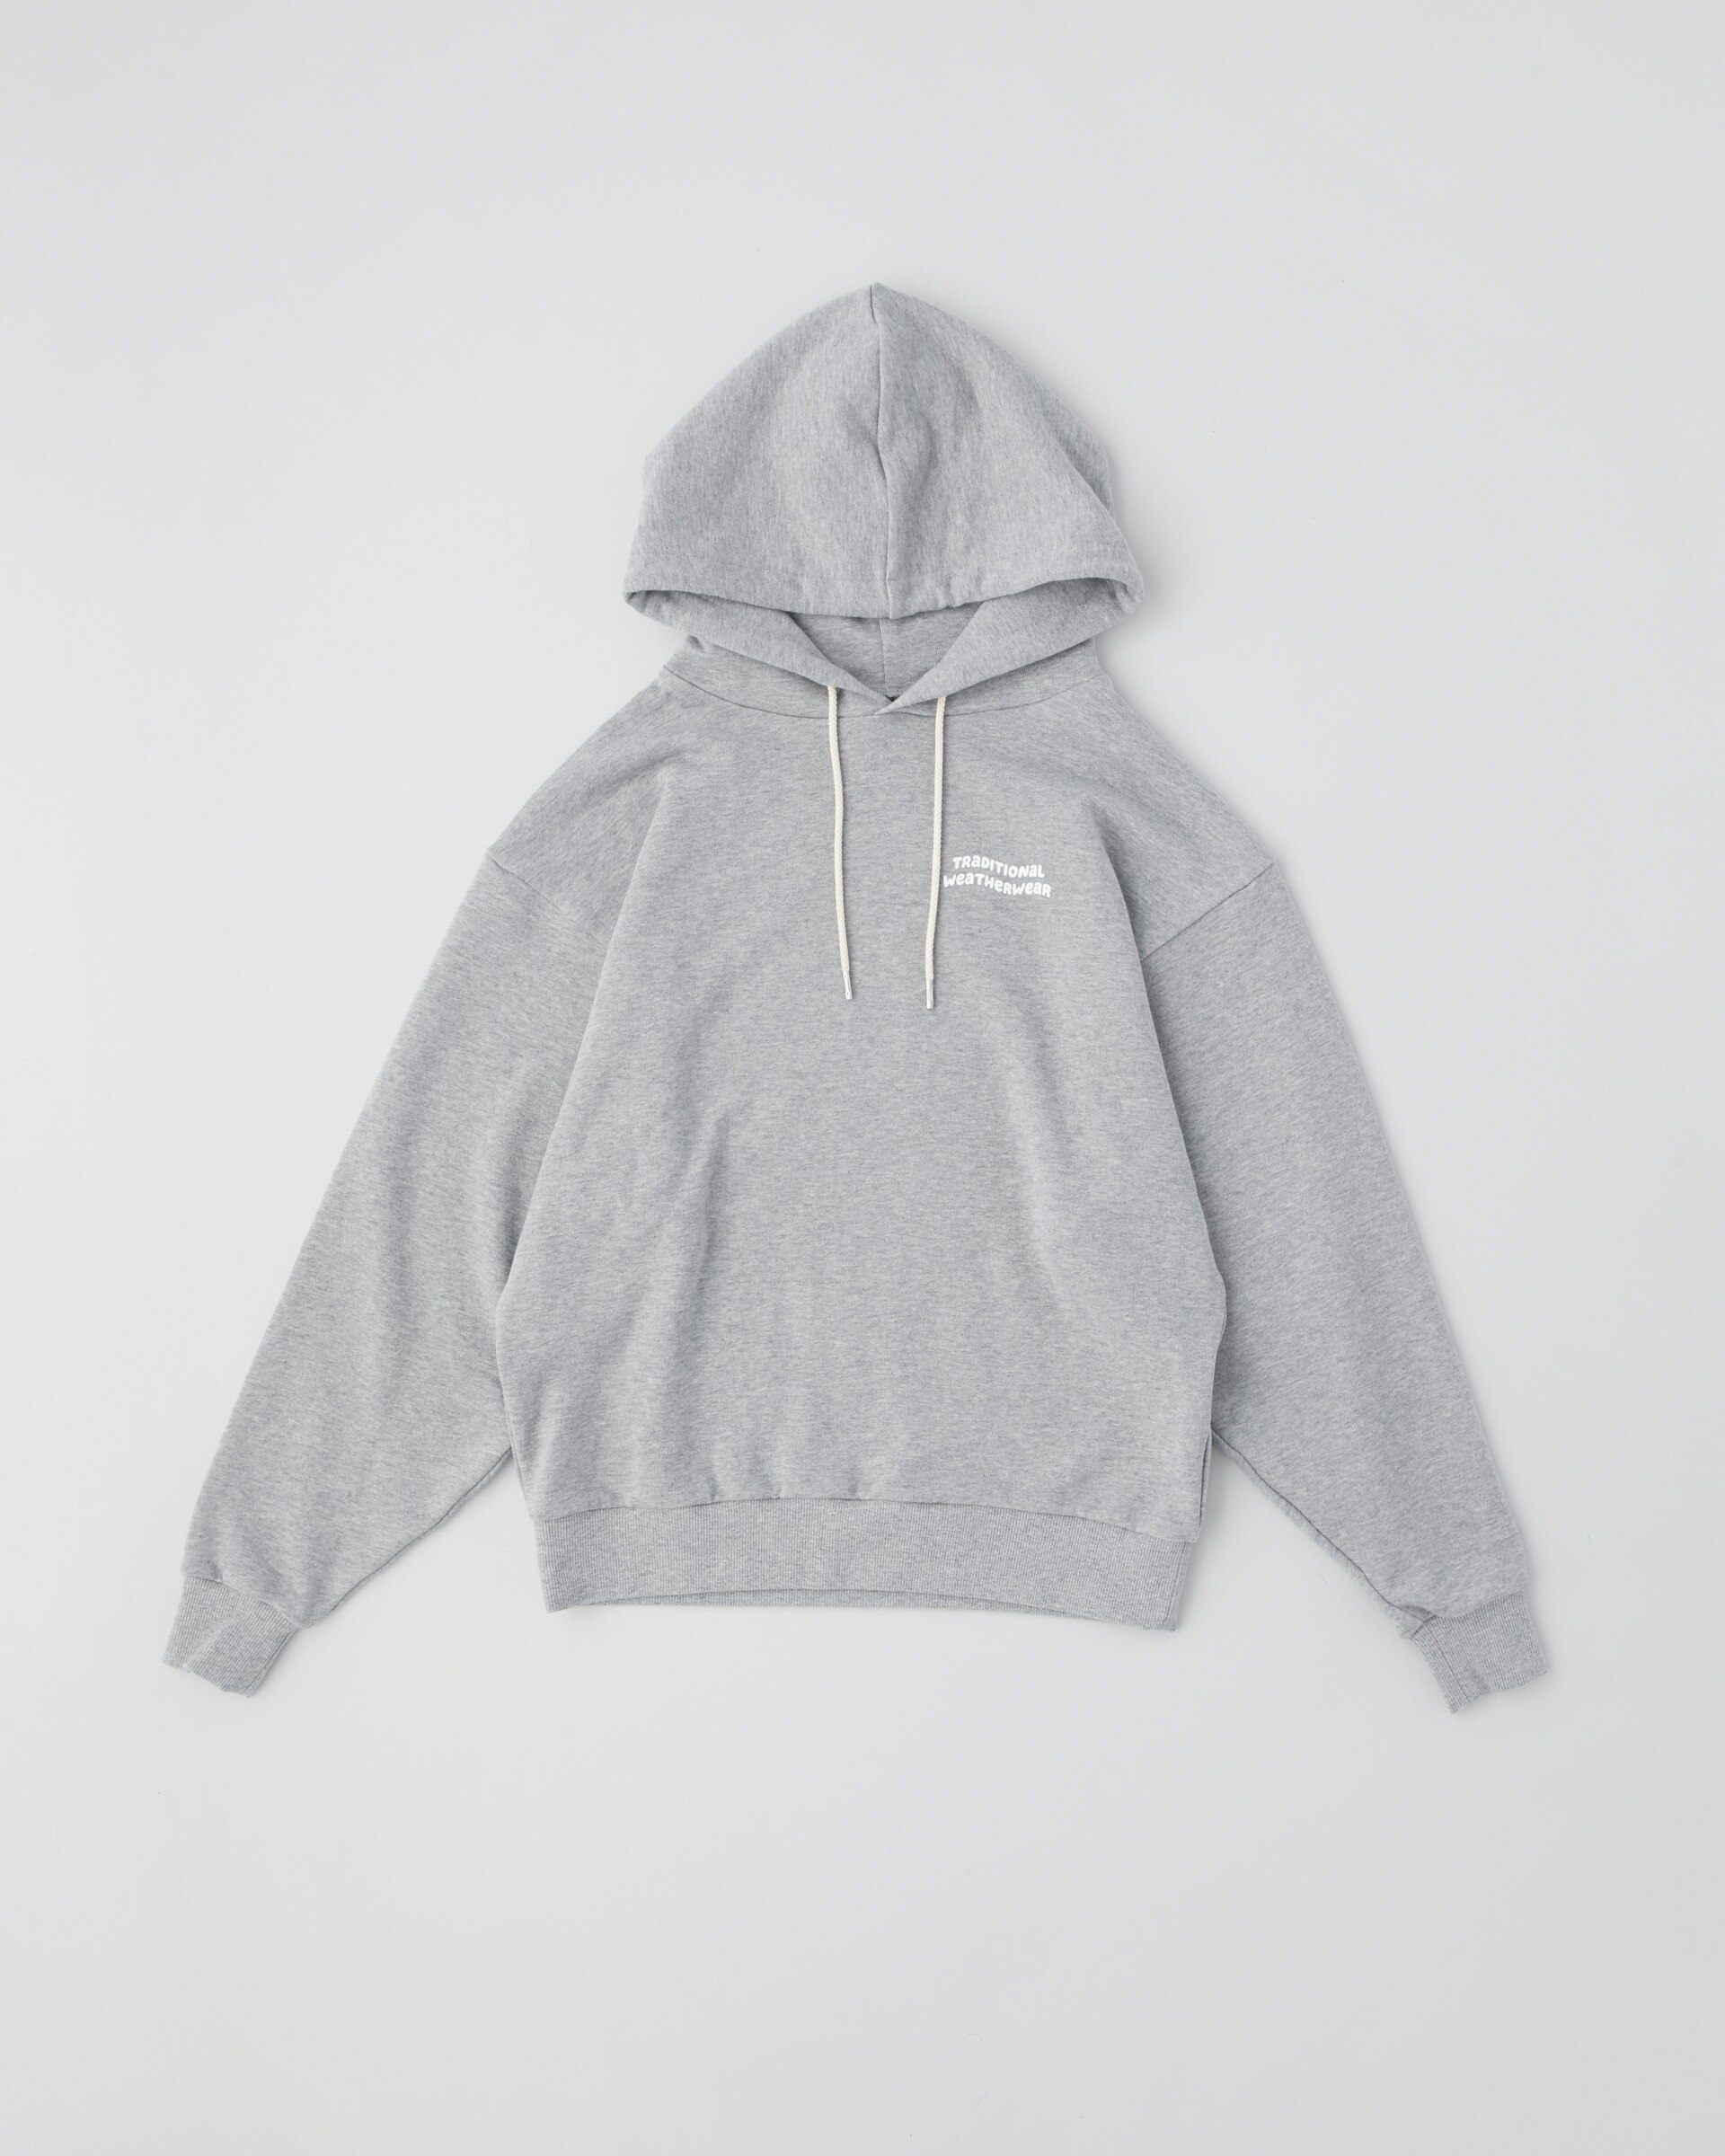 WAVE LOGO PULL OVER SWEAT PARKA|Traditional Weatherwear